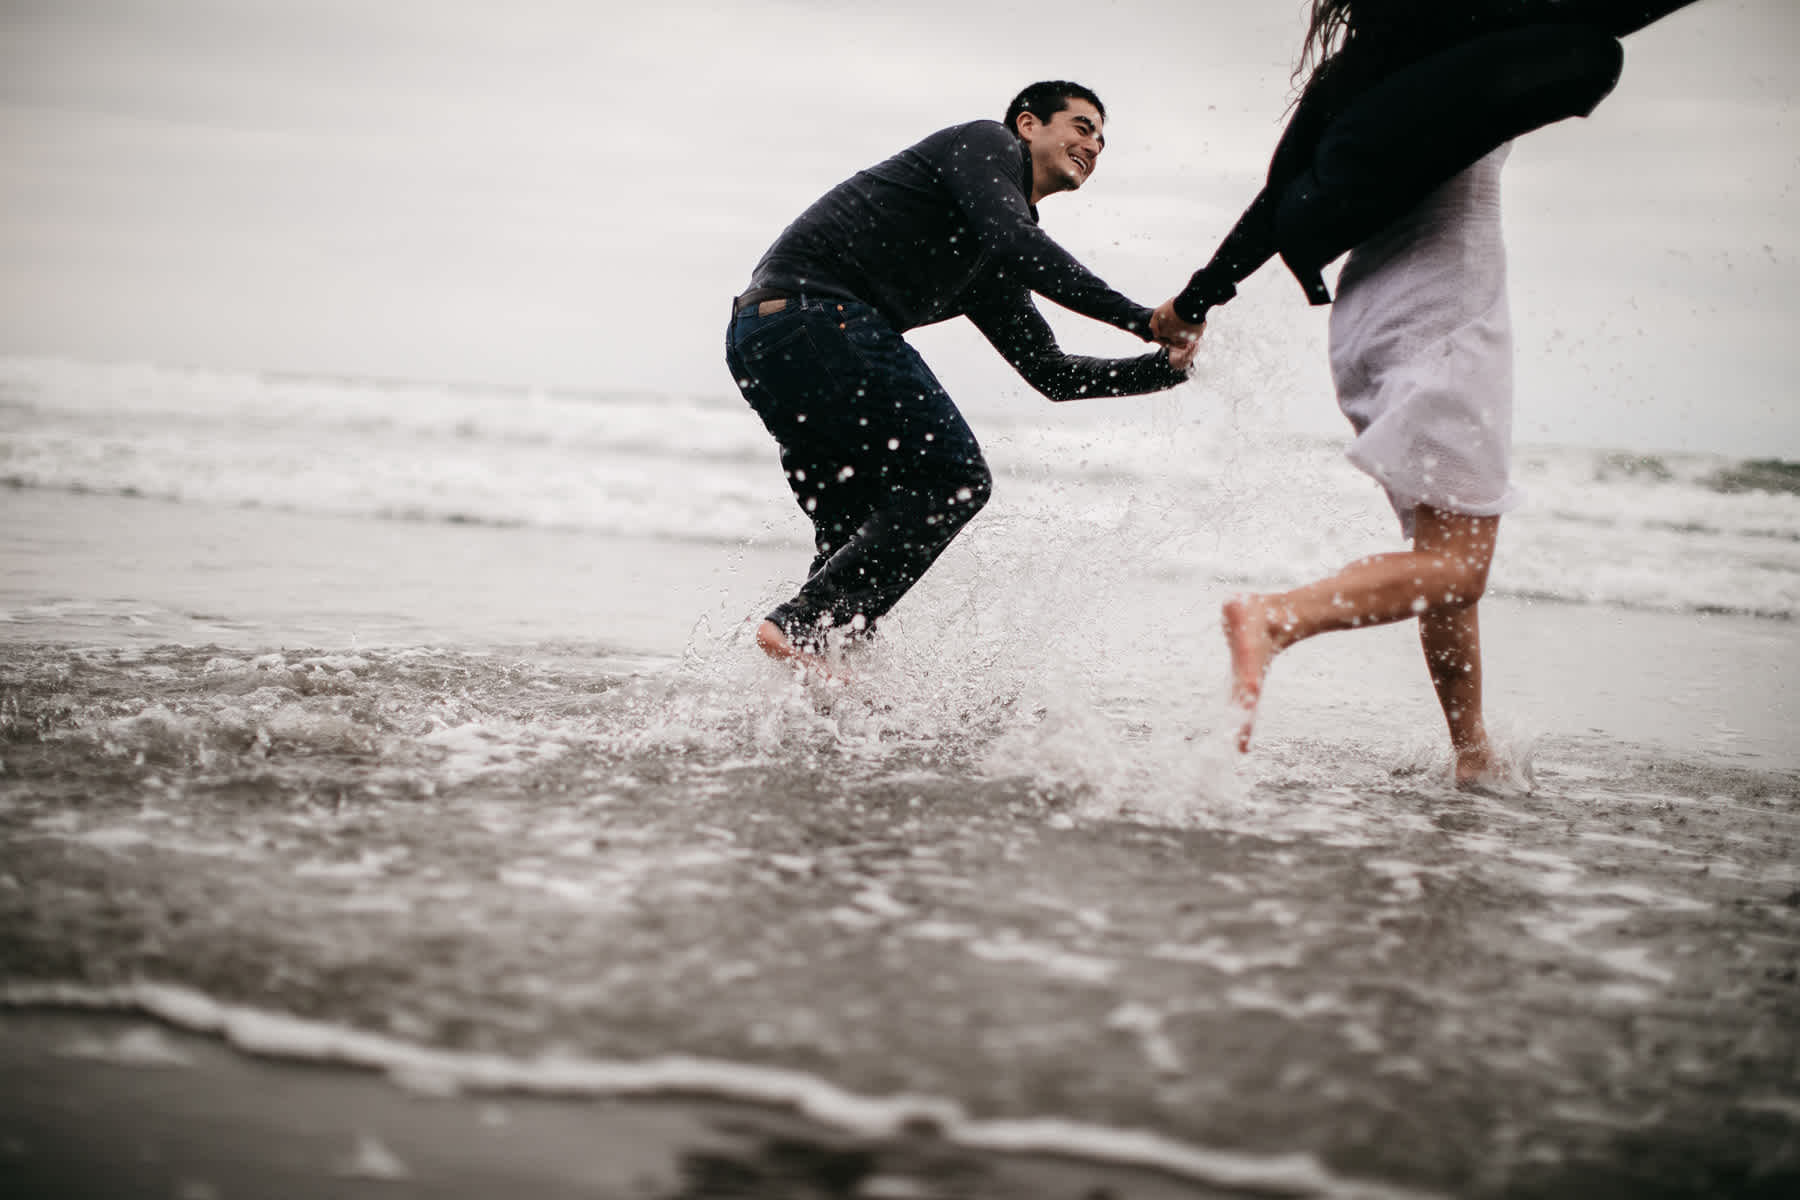 fort-funston-foggy-fun-beach-water-engagement-session-77